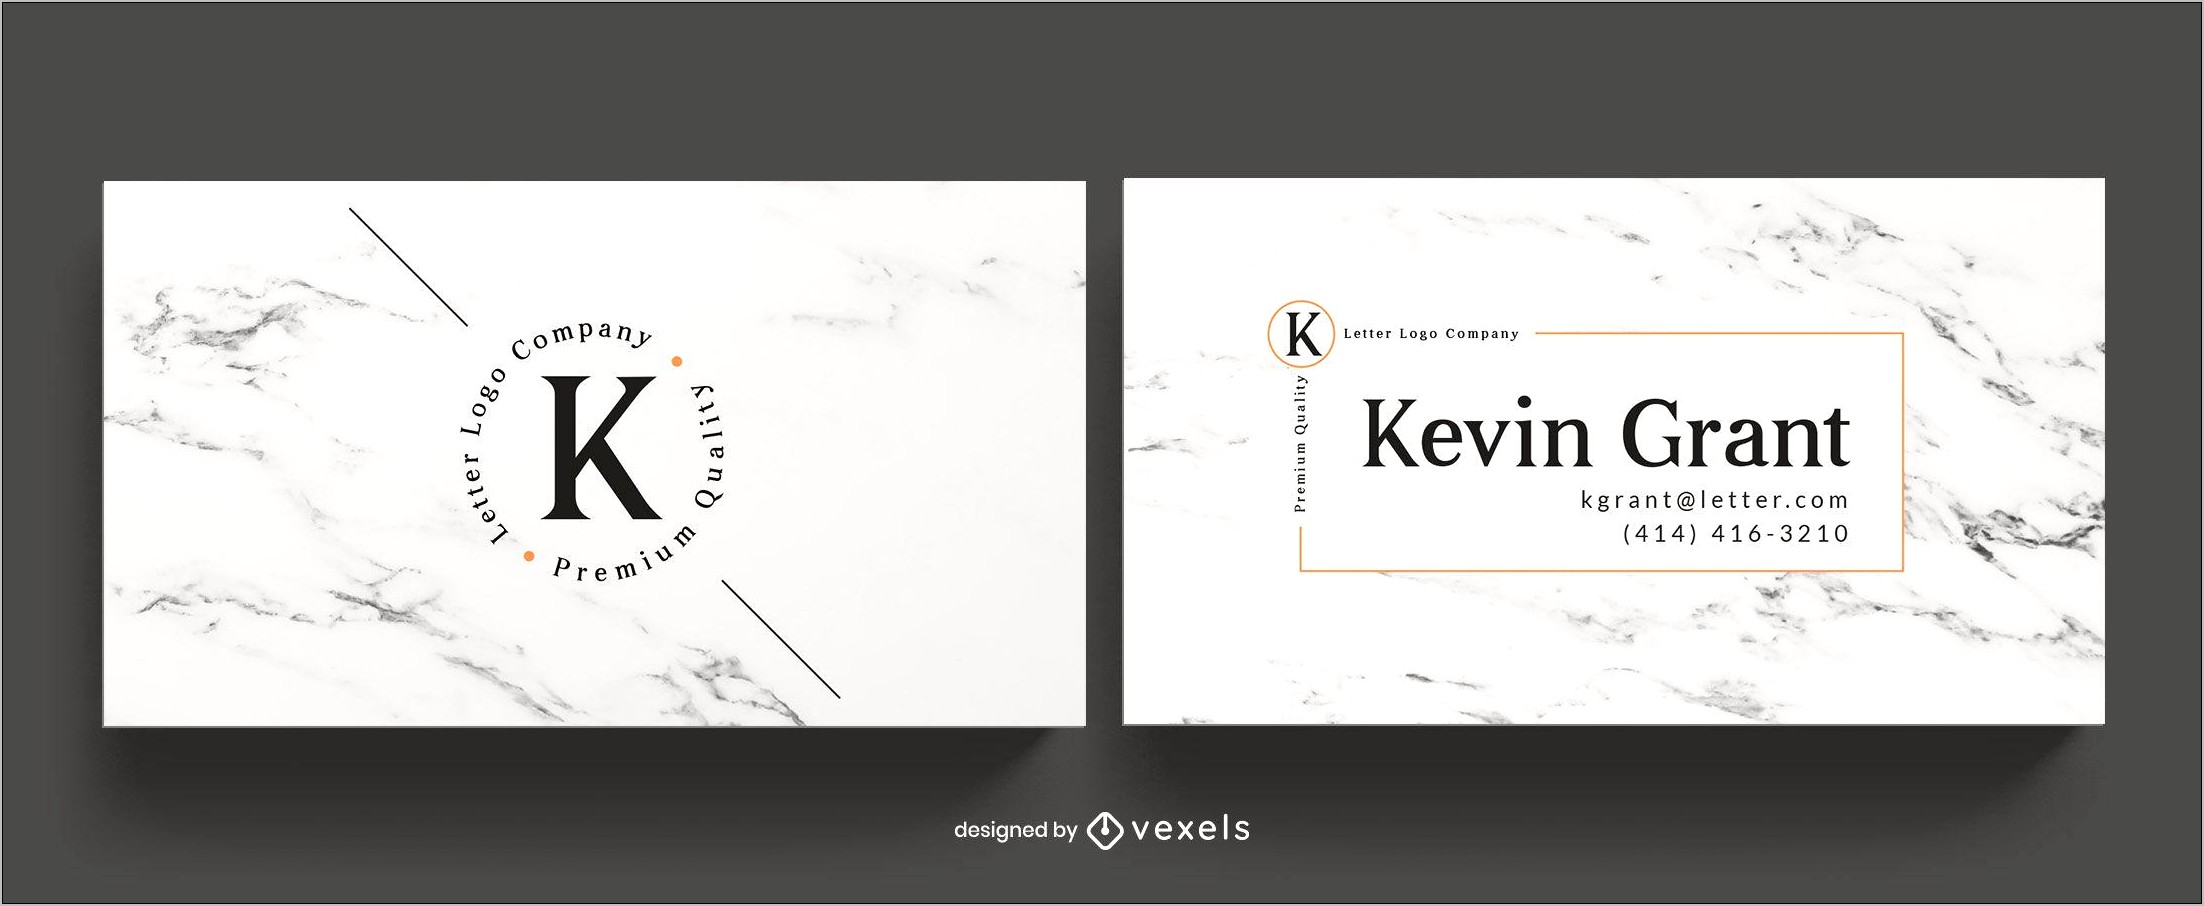 Free Business Card Vector Design Templates